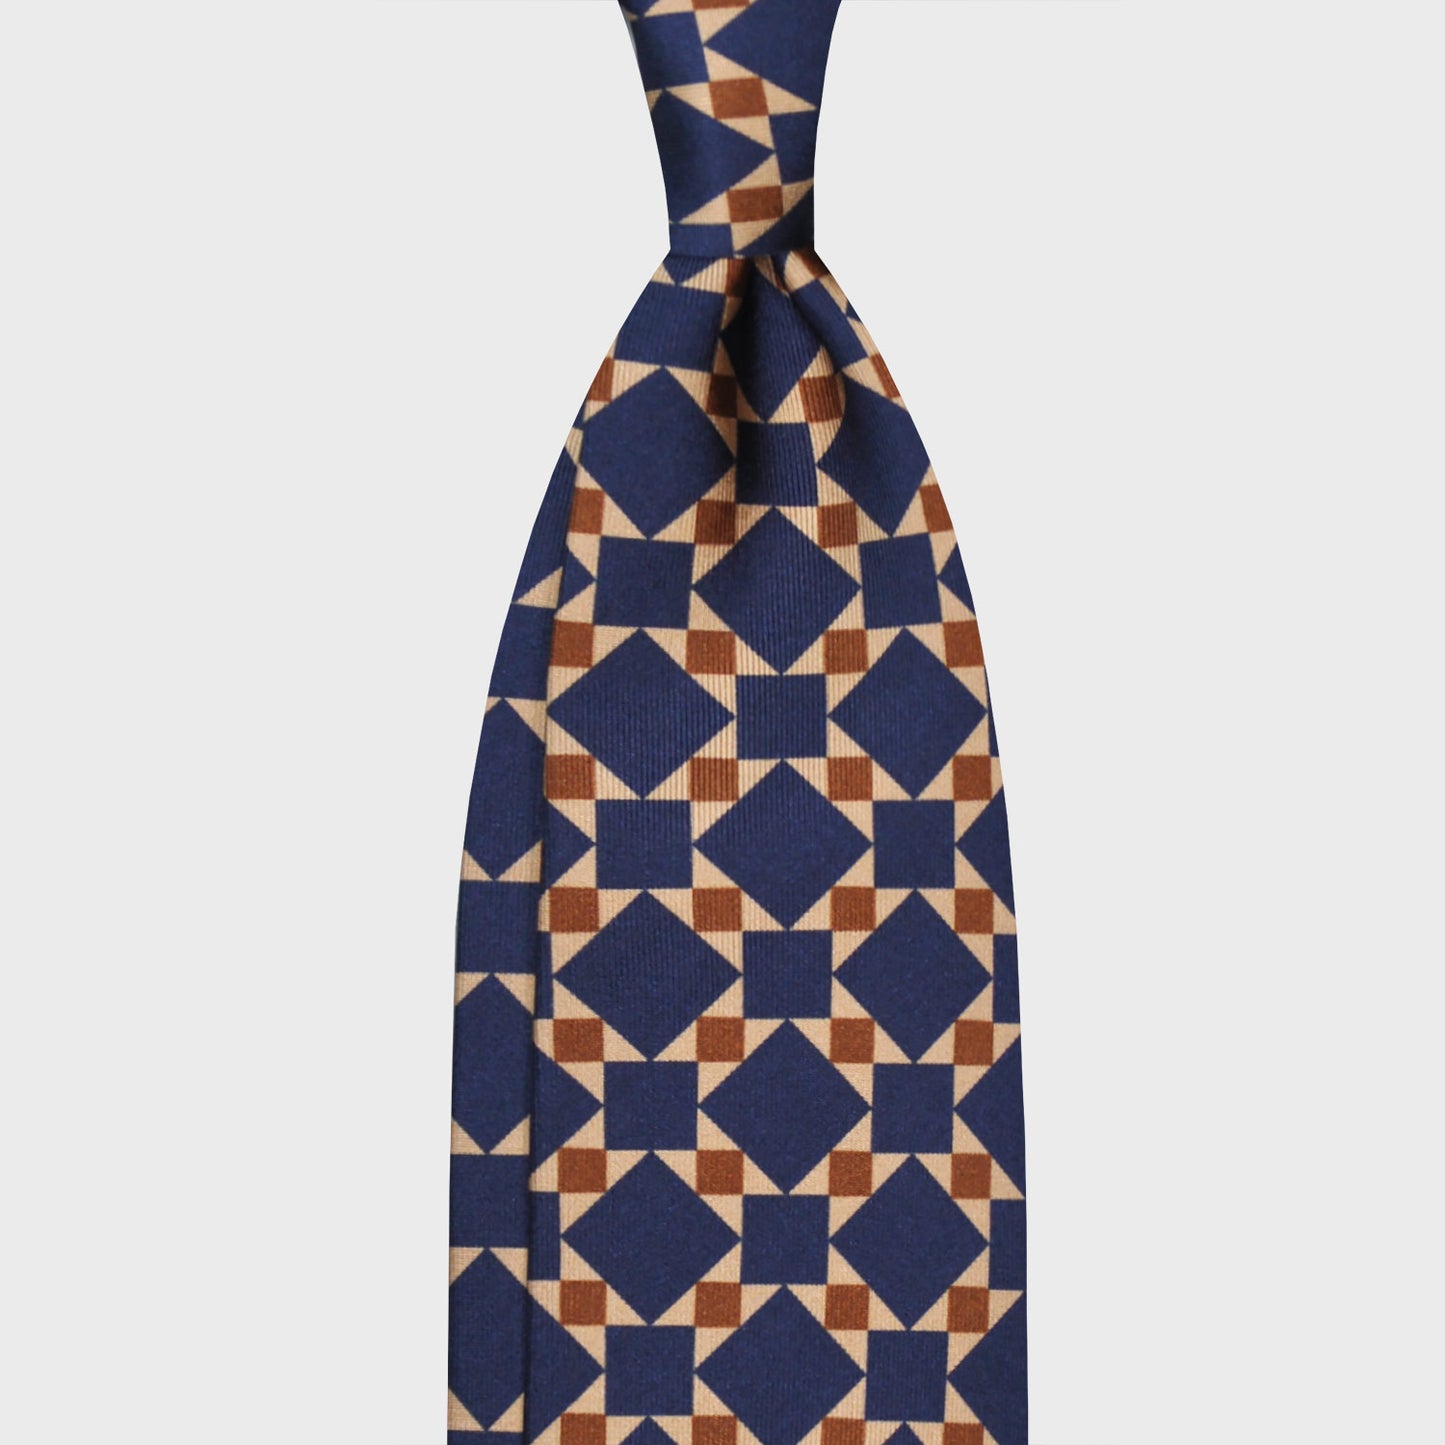 Cobalt Blue Mosaic Pattern Silk Tie. Exclusive silk tie made with finest Italian silk soft to the touch, sand beige background with cobalt blue and rust brown mosaic pattern, unlined tie 3 folds, F.Marino Napoli ties exclusive for Wools Boutique Uomo